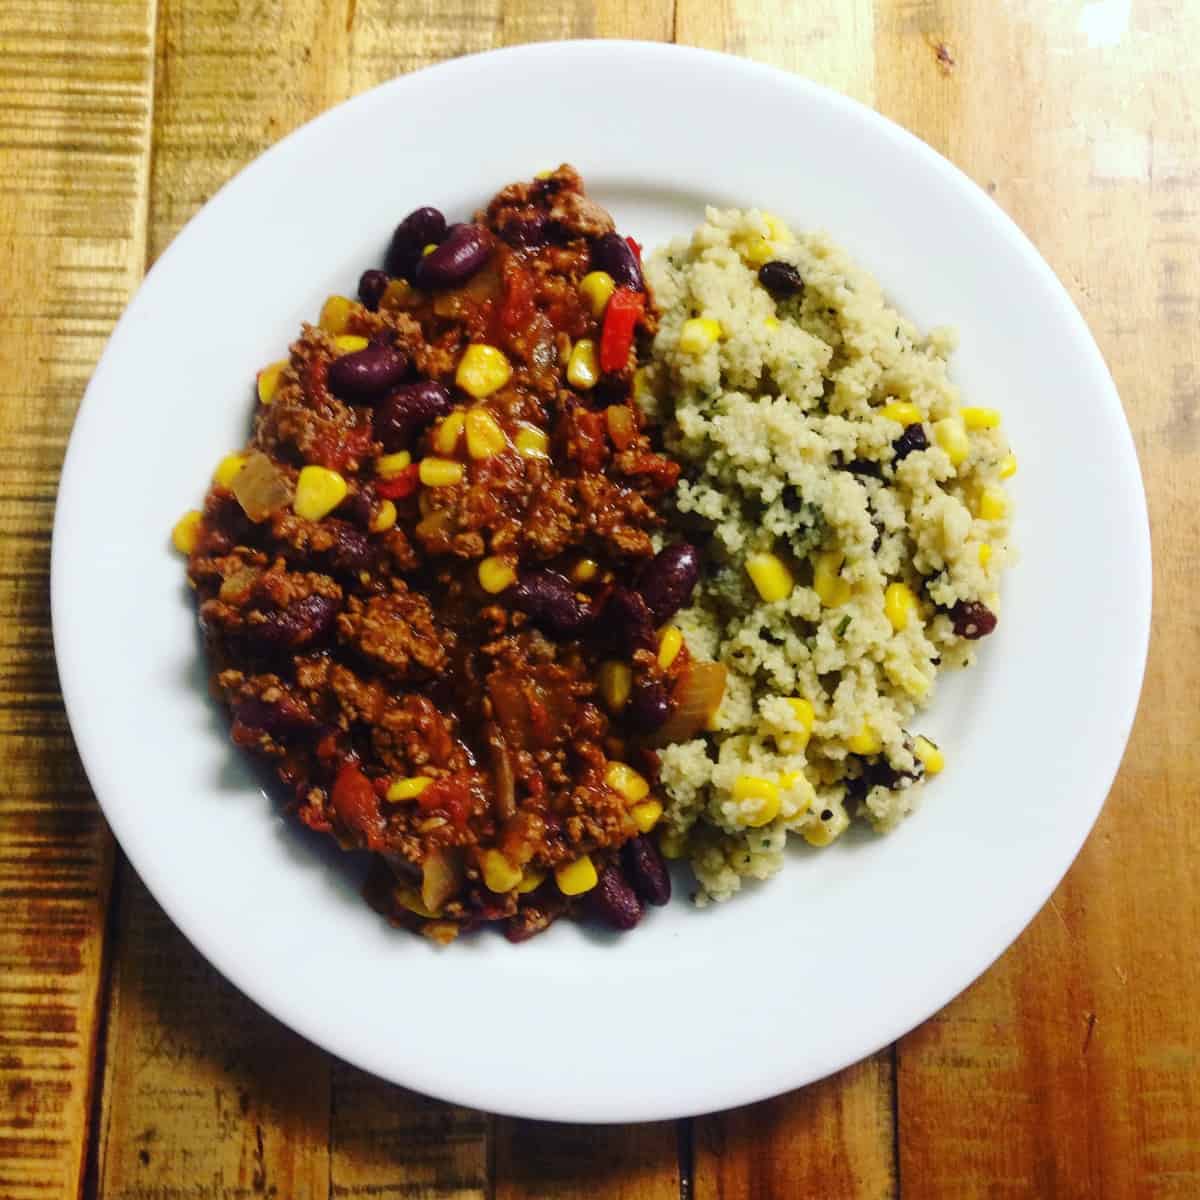 Chilli con carne - recommended meal to cook in hostel